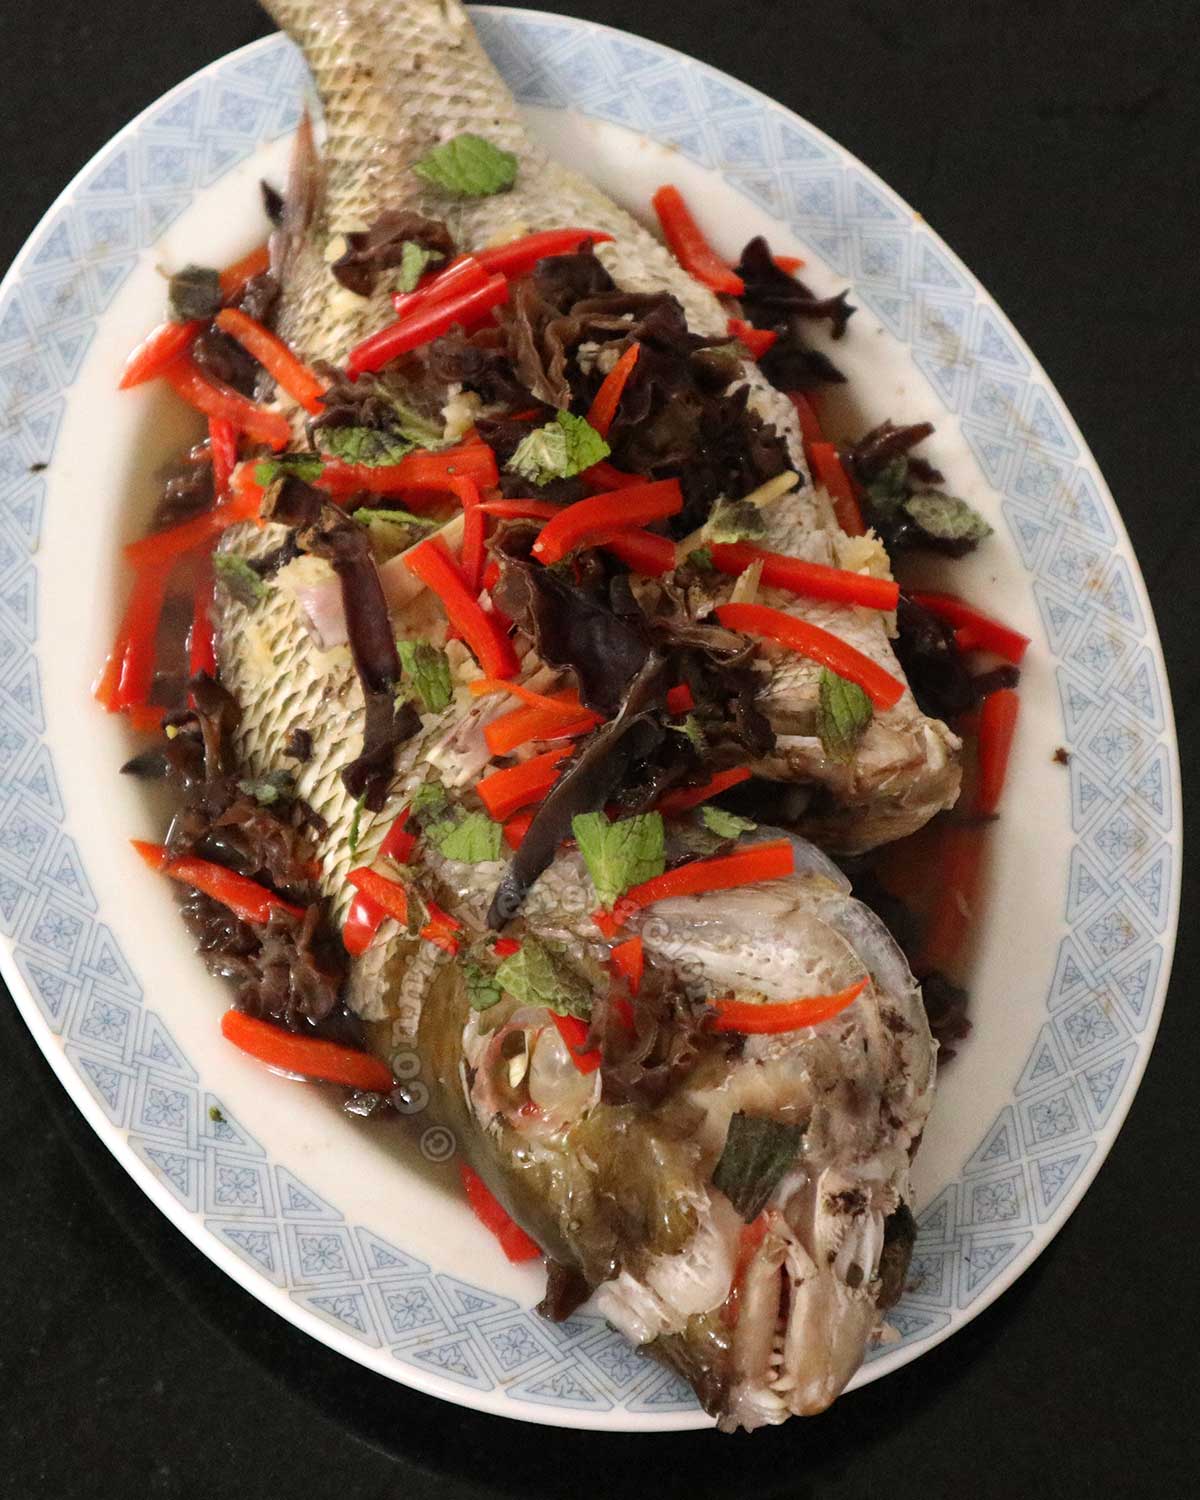 Steamed Whole Fish with Wood Ears